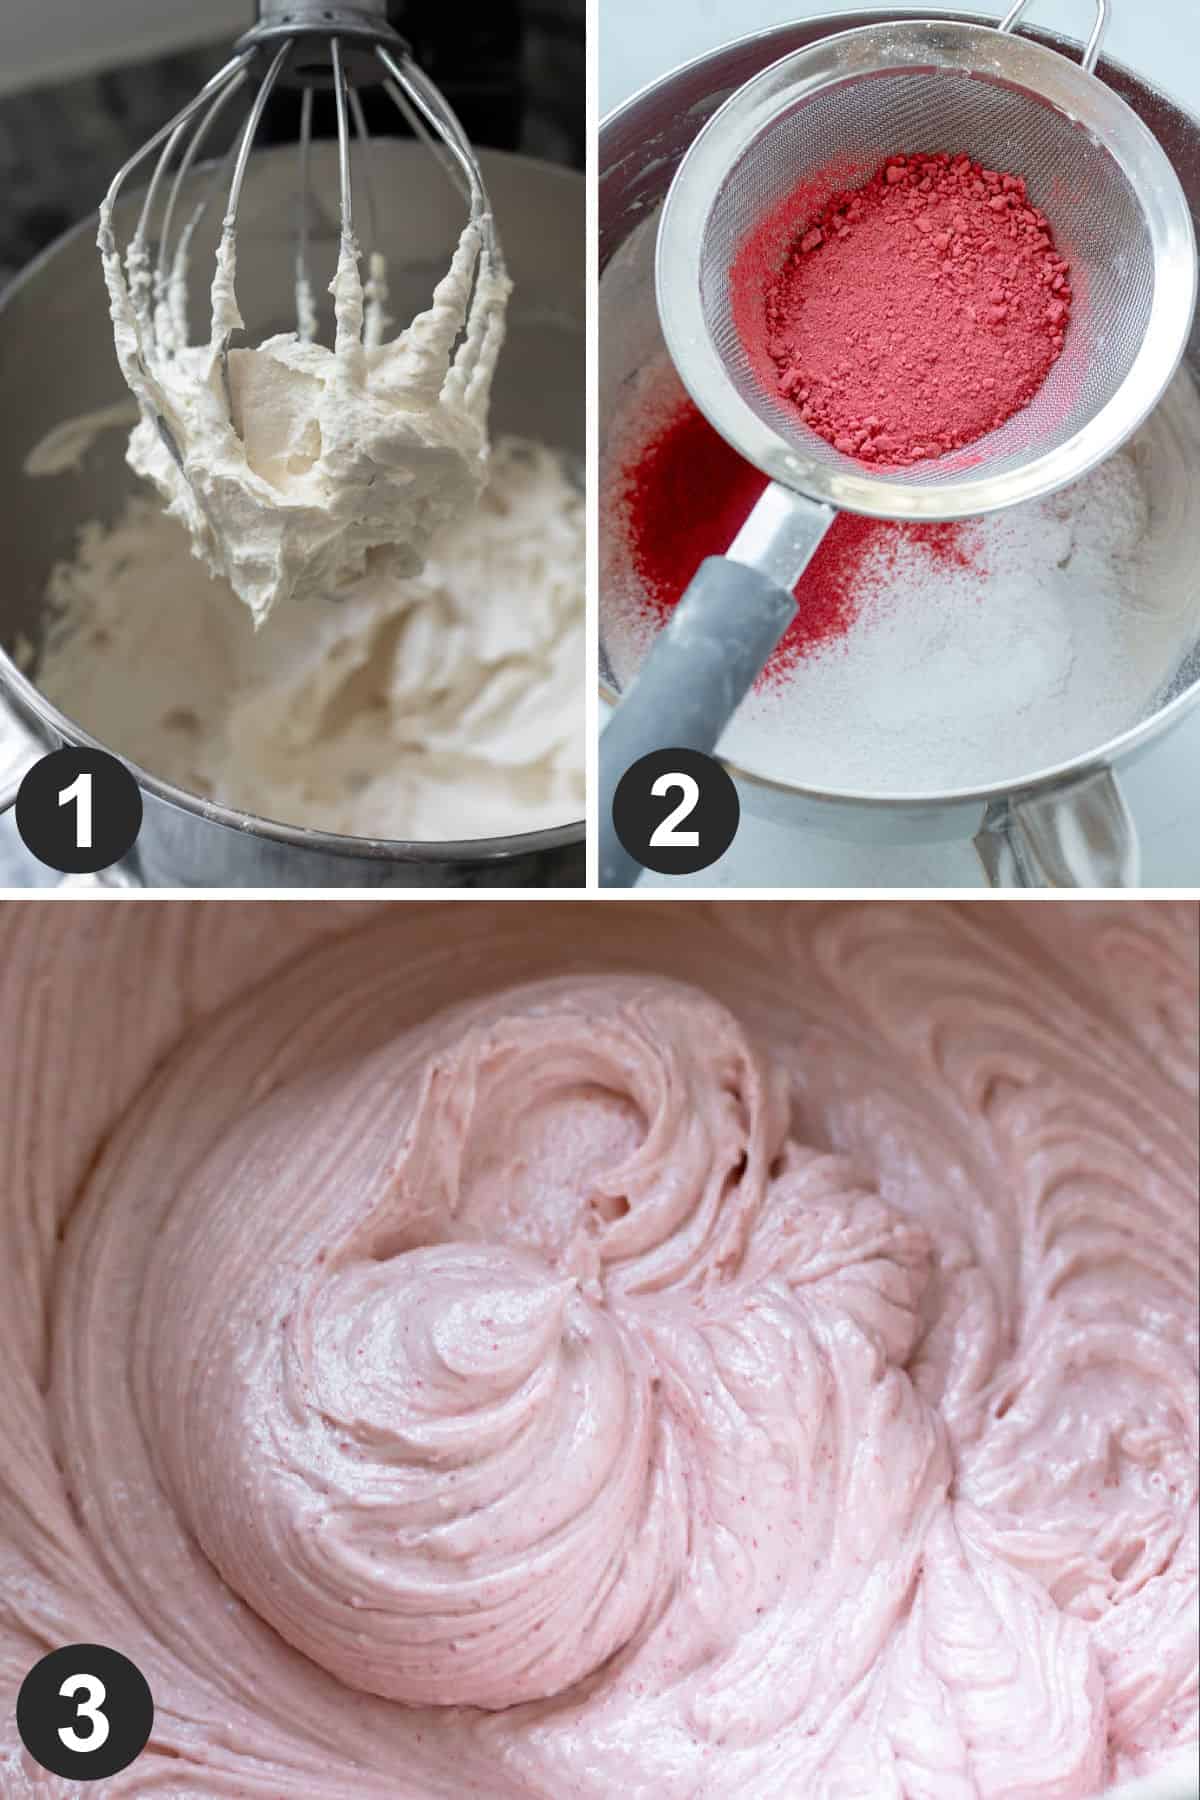 A collage showing the stages of making vegan strawberry frosting for cake.